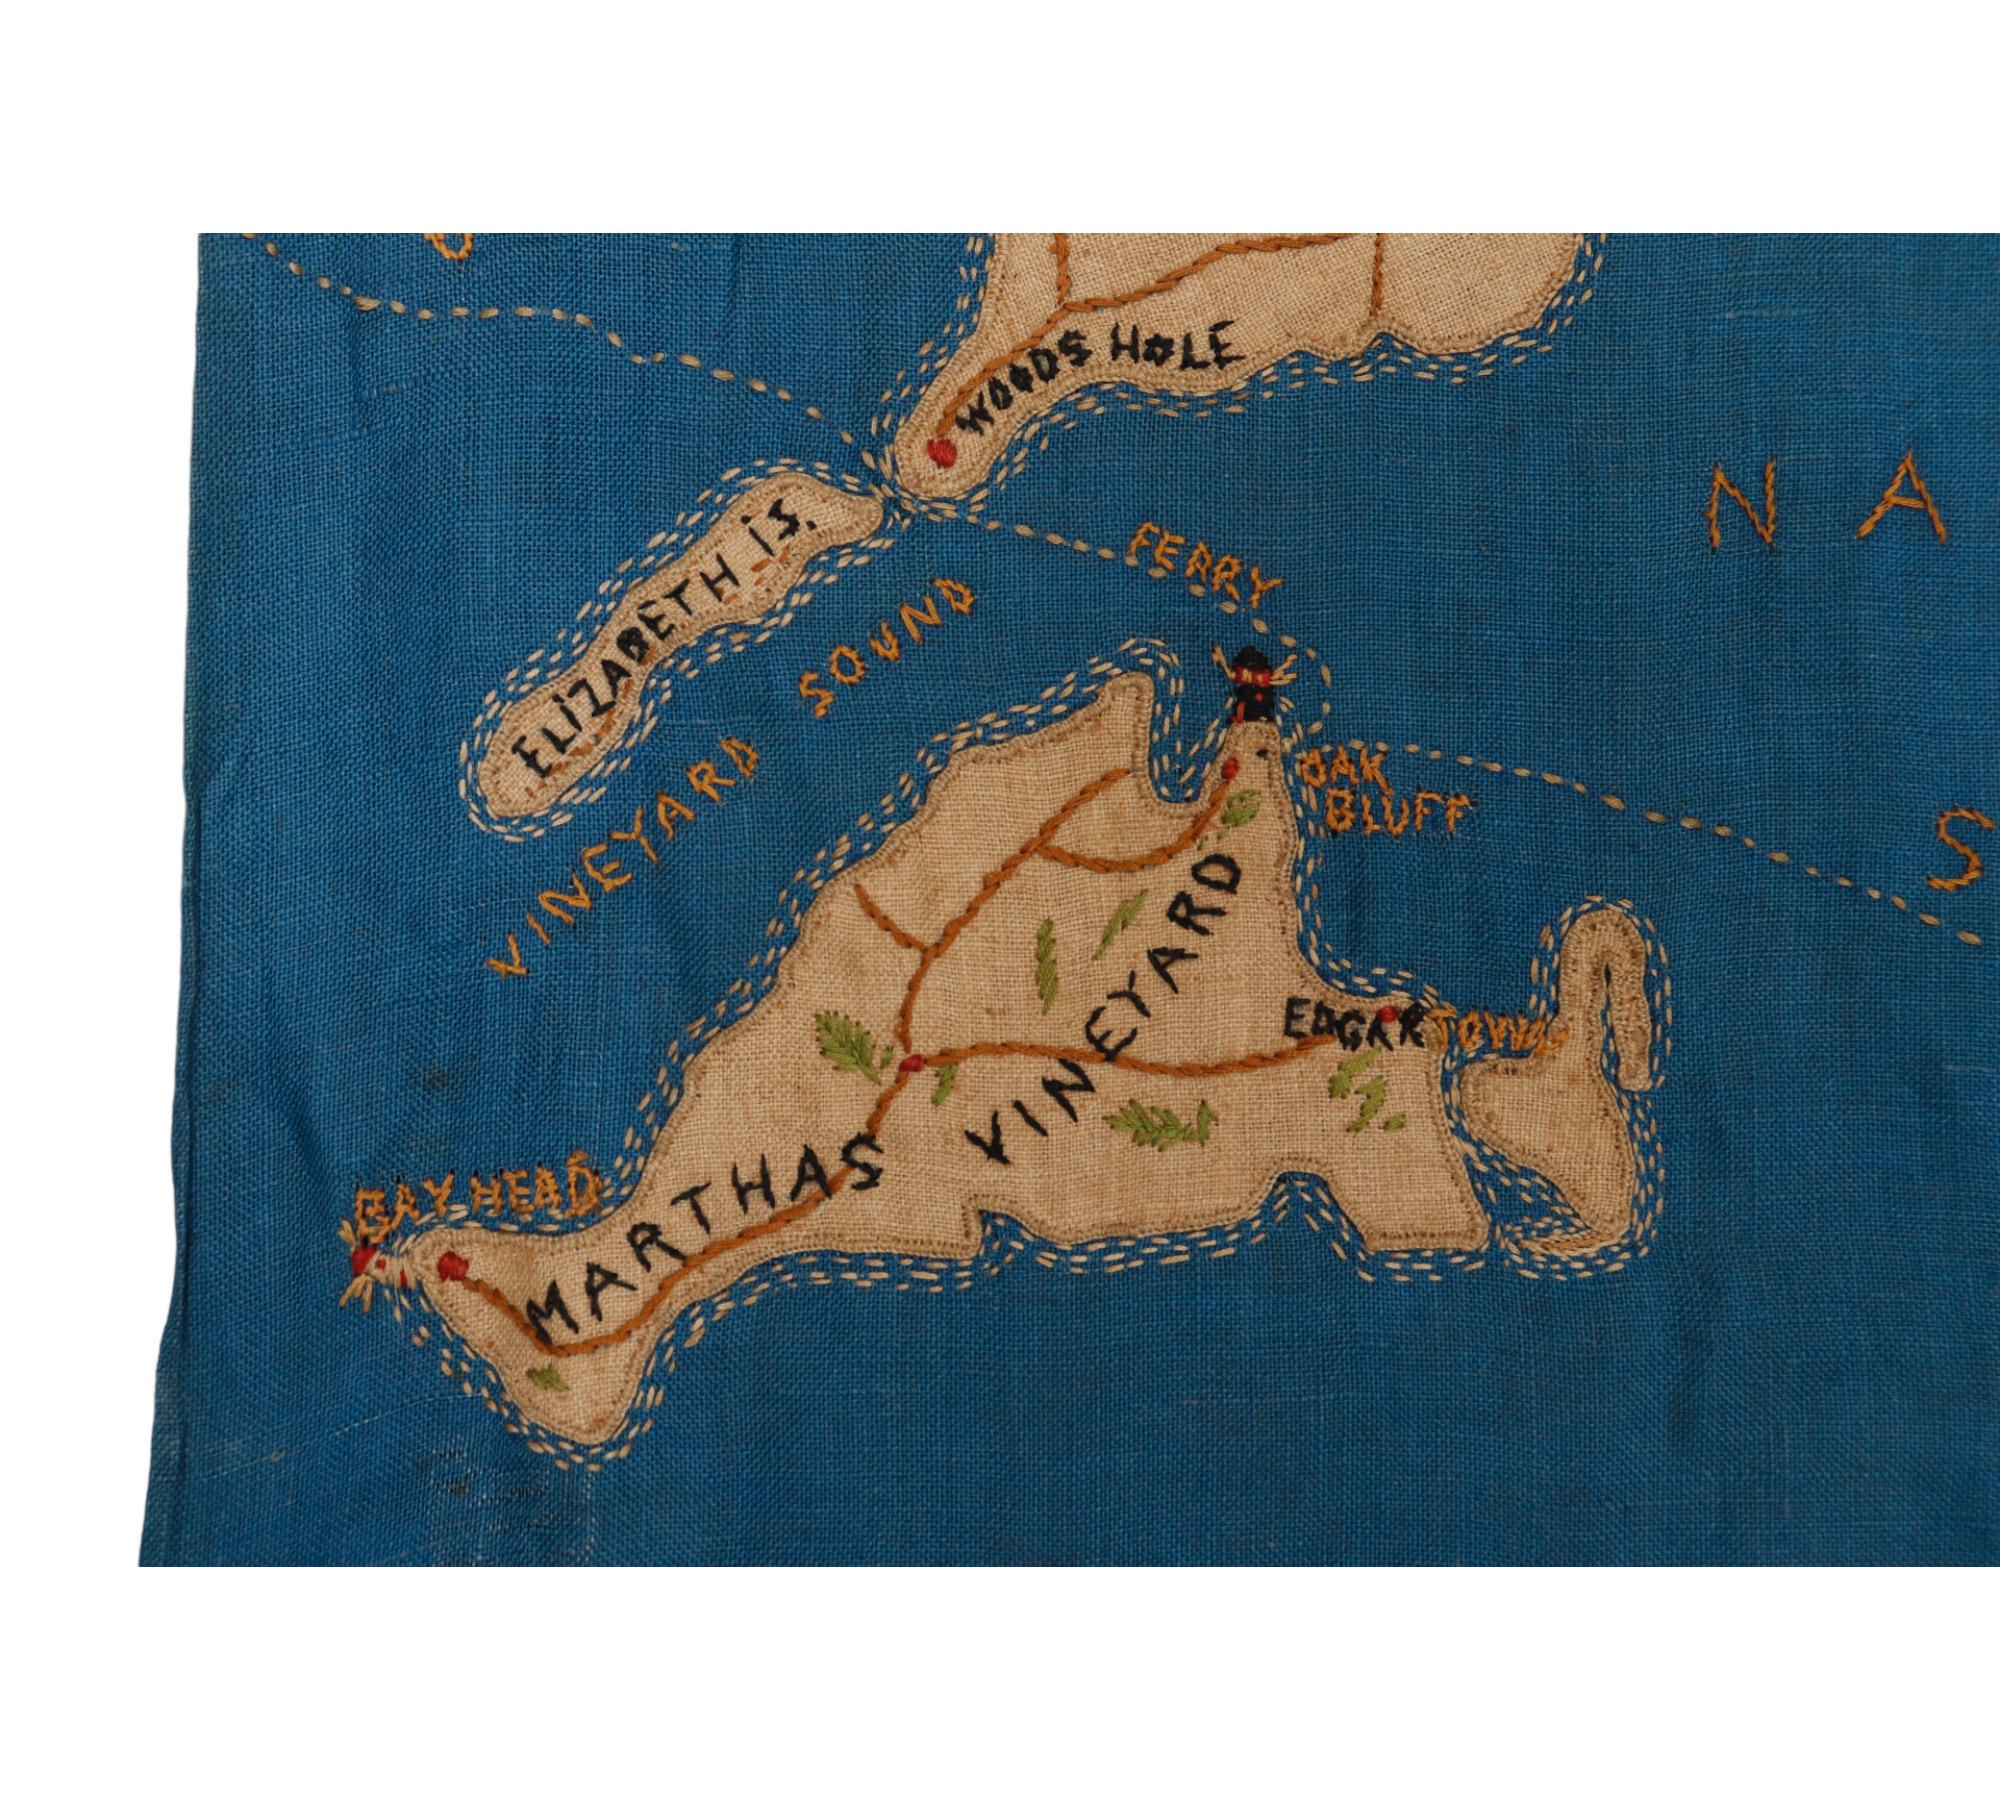 A hand embroidered wall hanging of the Cape Cod peninsula. Depicts Cape Cod, Nantucket Sound, Nantucket and Martha's Vineyard, and the Atlantic Ocean. Details towns, roads, lighthouses and the ferry route. The blue water replete with boats,